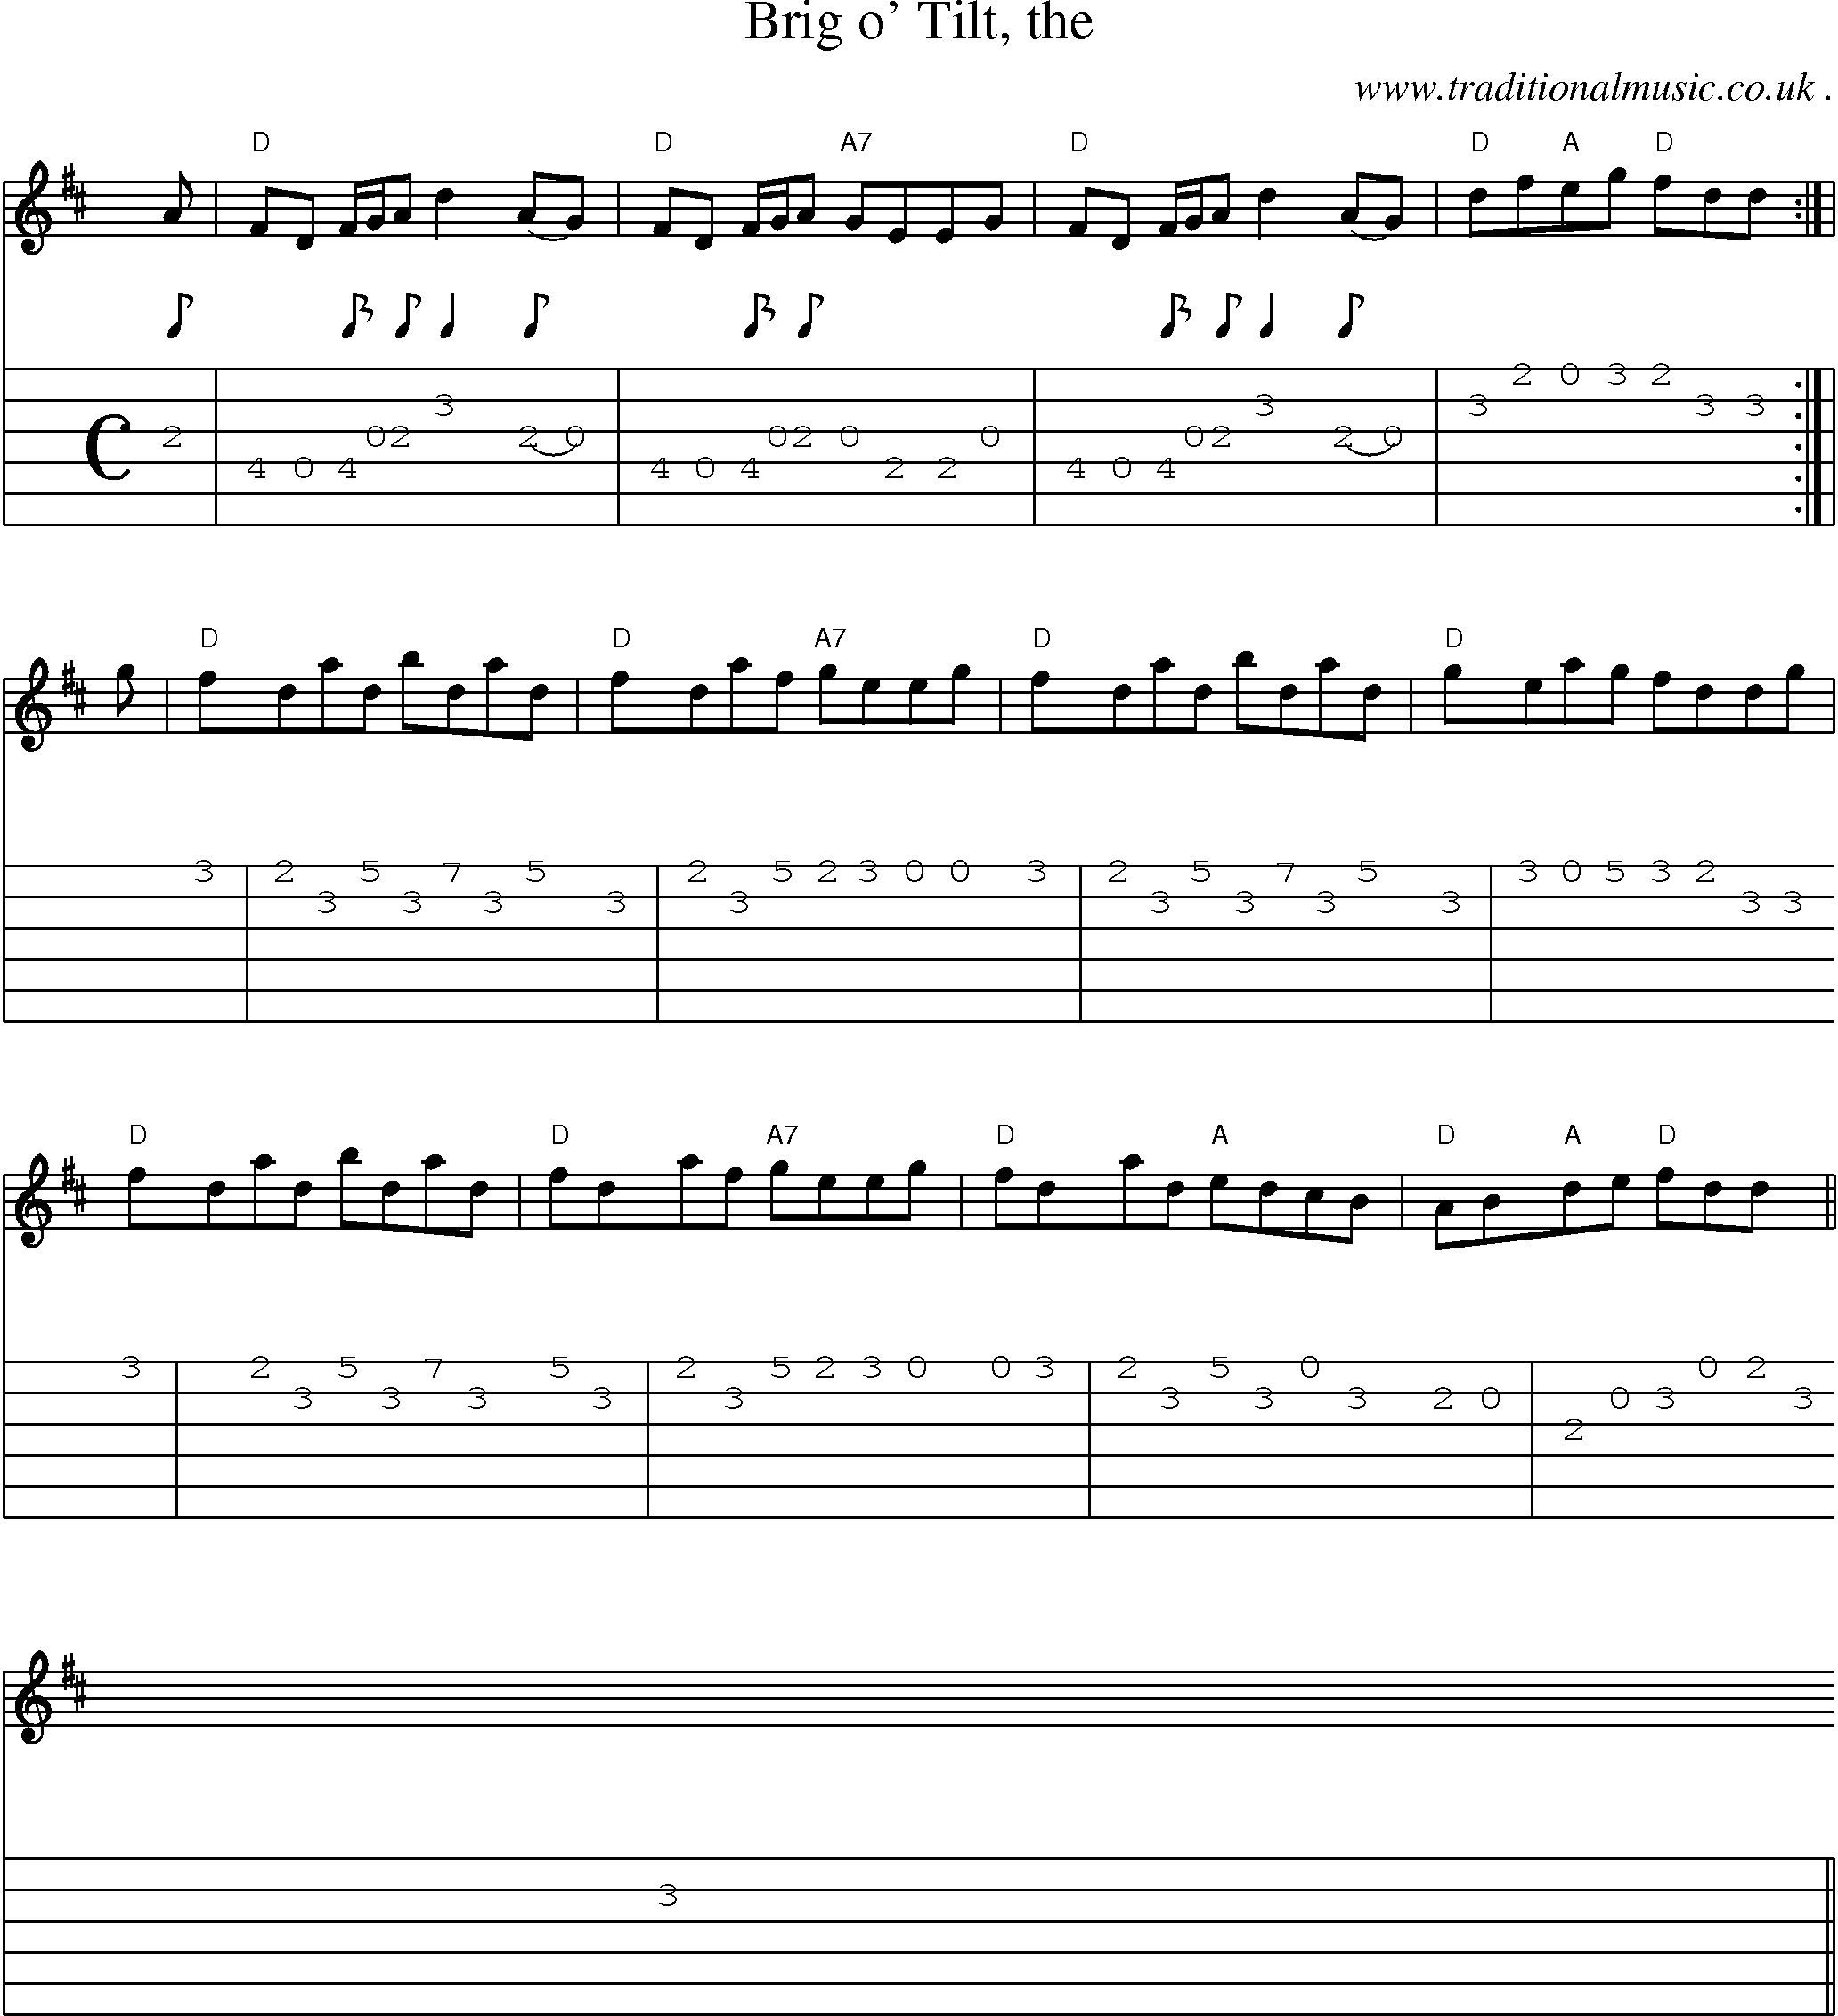 Sheet-music  score, Chords and Guitar Tabs for Brig O Tilt The